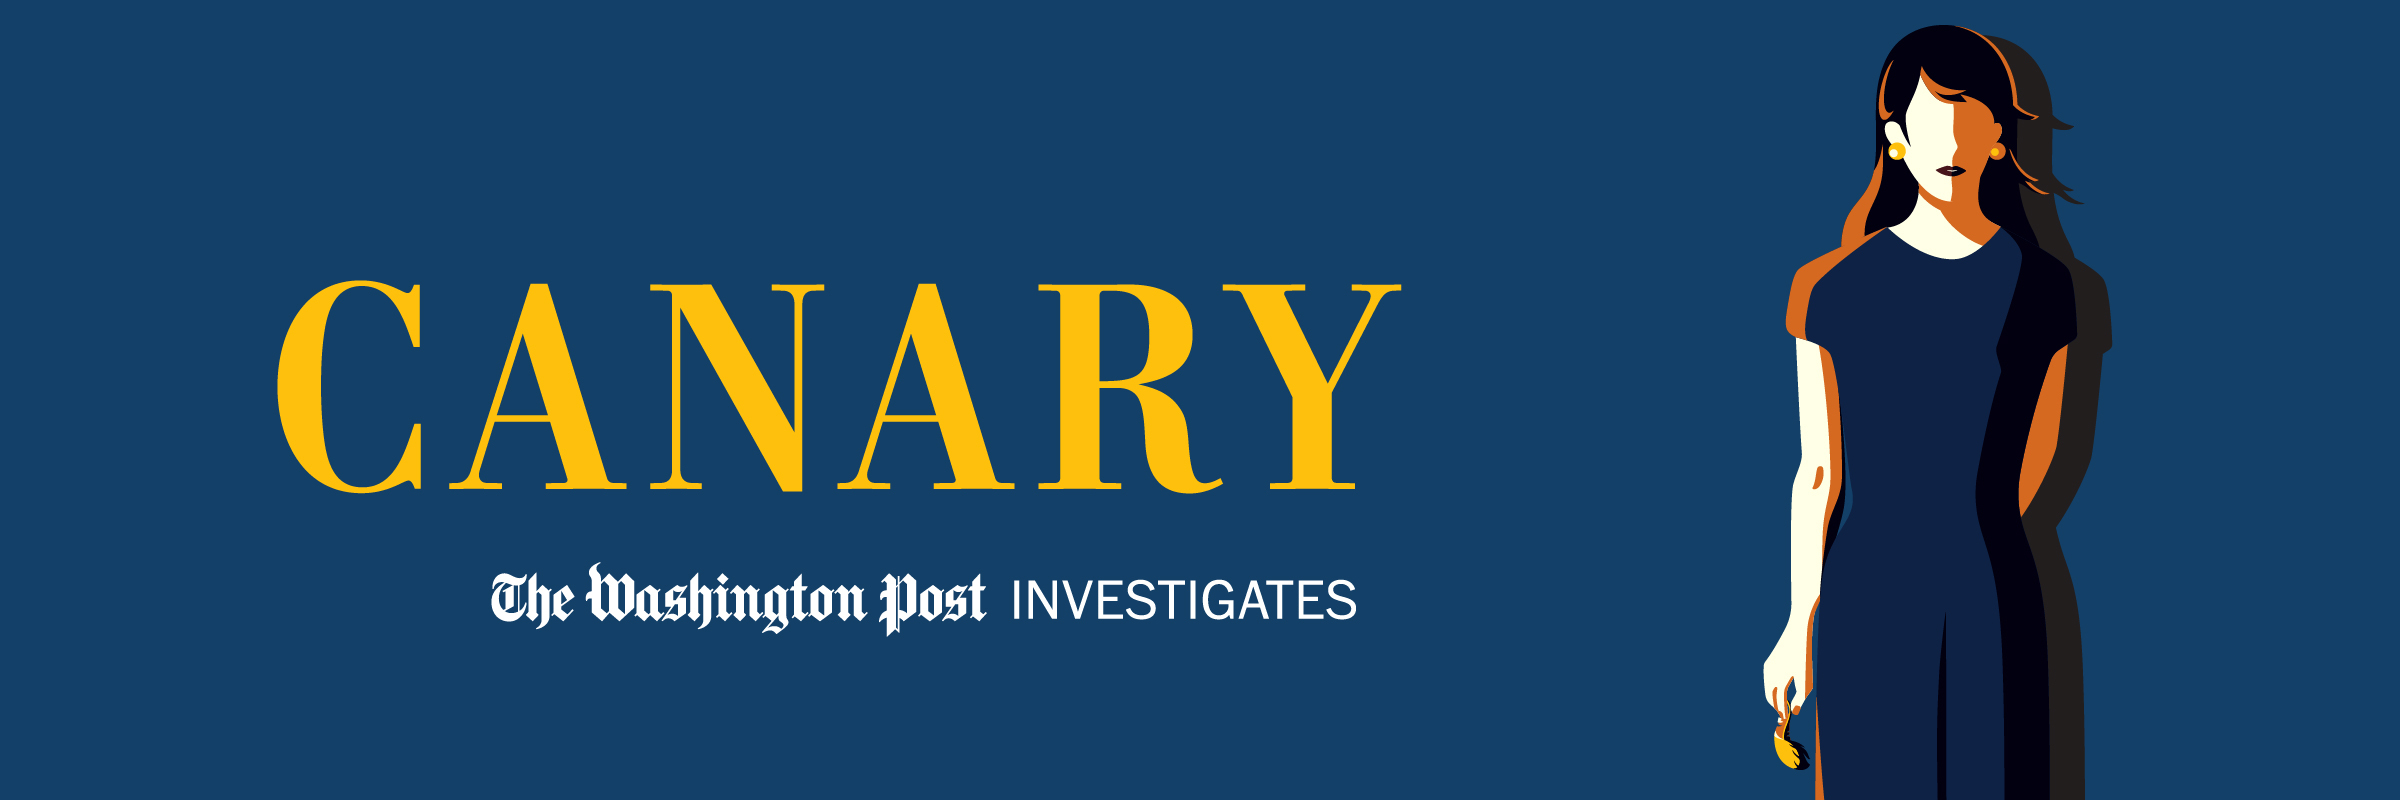 Canary: The Washington Post Investigates Series Cover Image